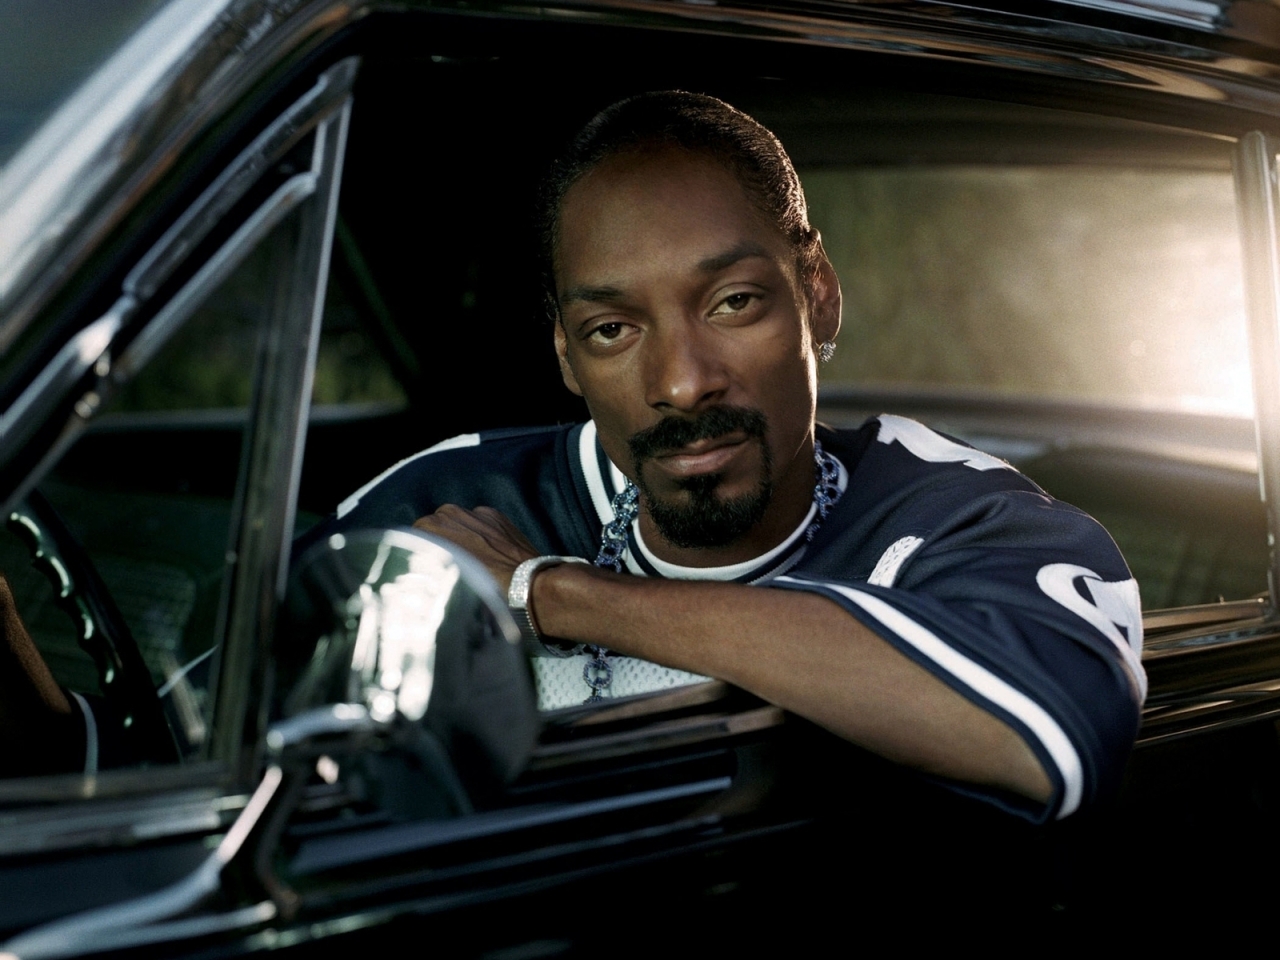 Snoop Dogg Look for 1280 x 960 resolution